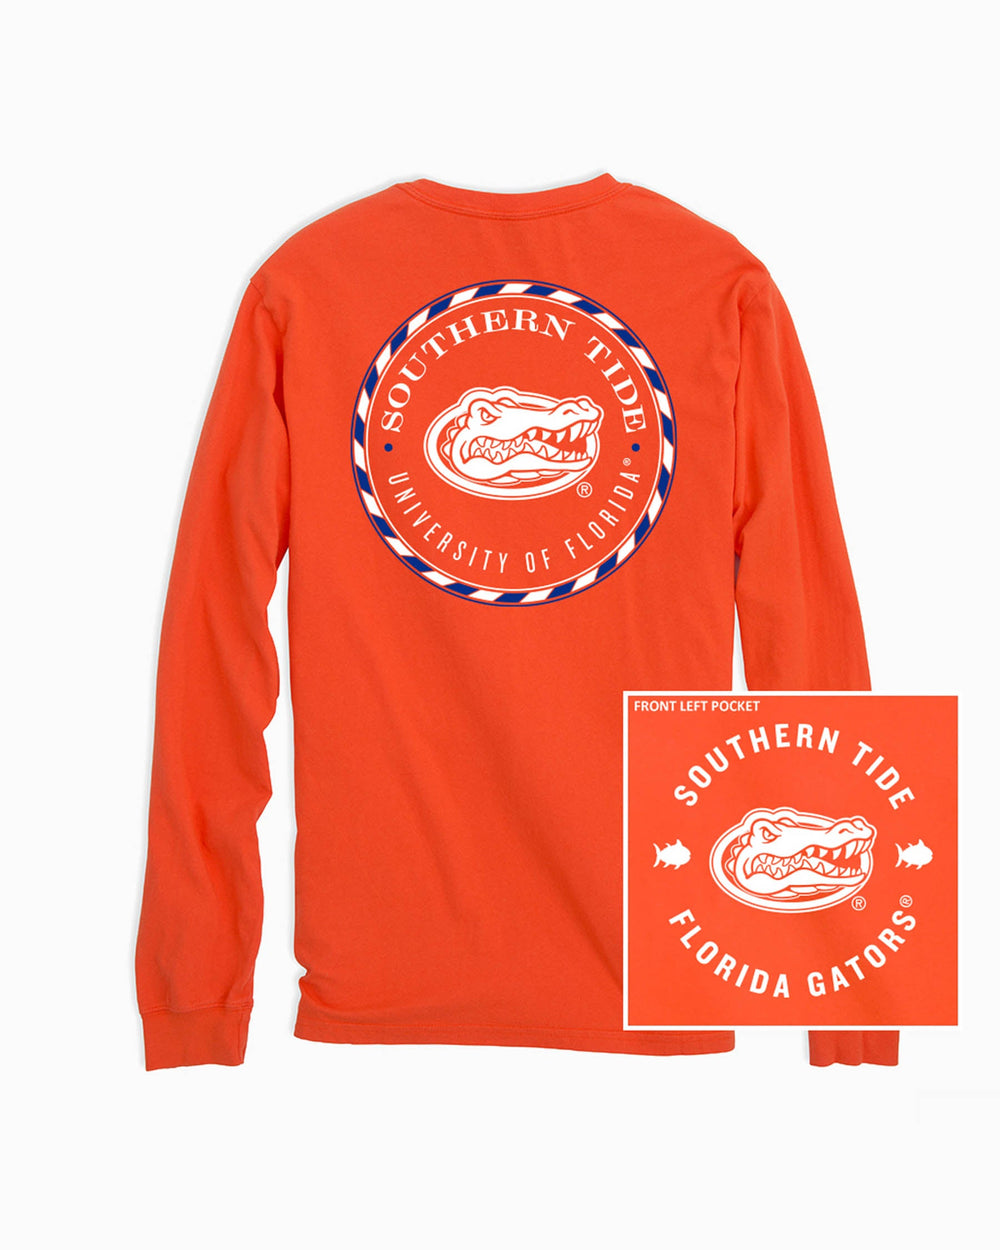 The front and back of the Florida Gators Long Sleeve Medallion Logo T-Shirt by Southern Tide - Endzone Orange